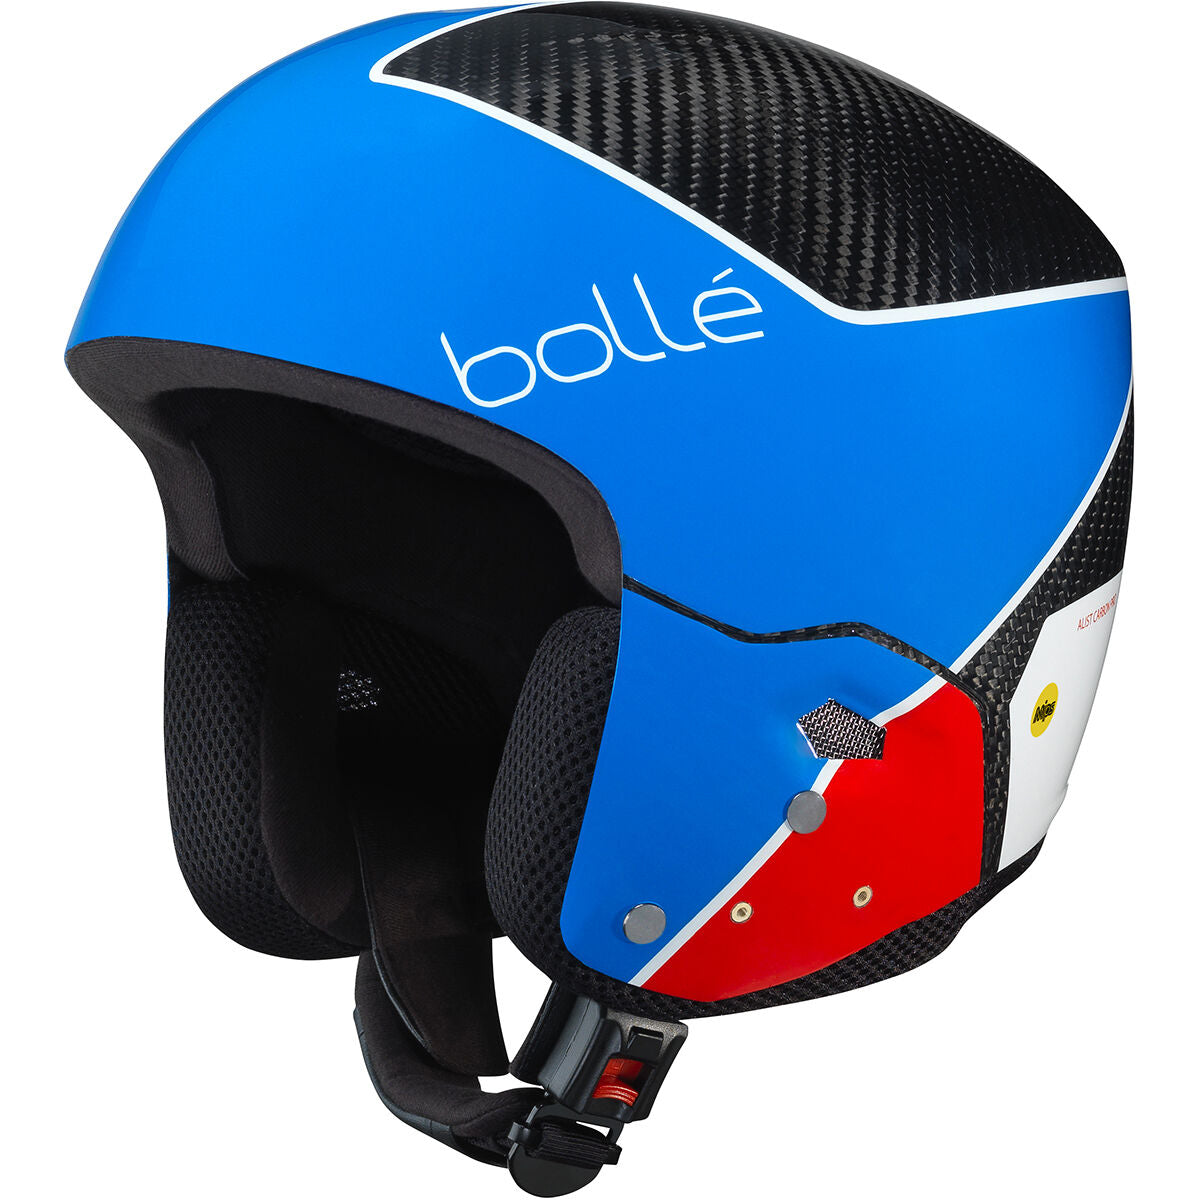 Bolle Medalist Carbon Pro Mips Goggles  Race Blue Shiny S-M 53-56